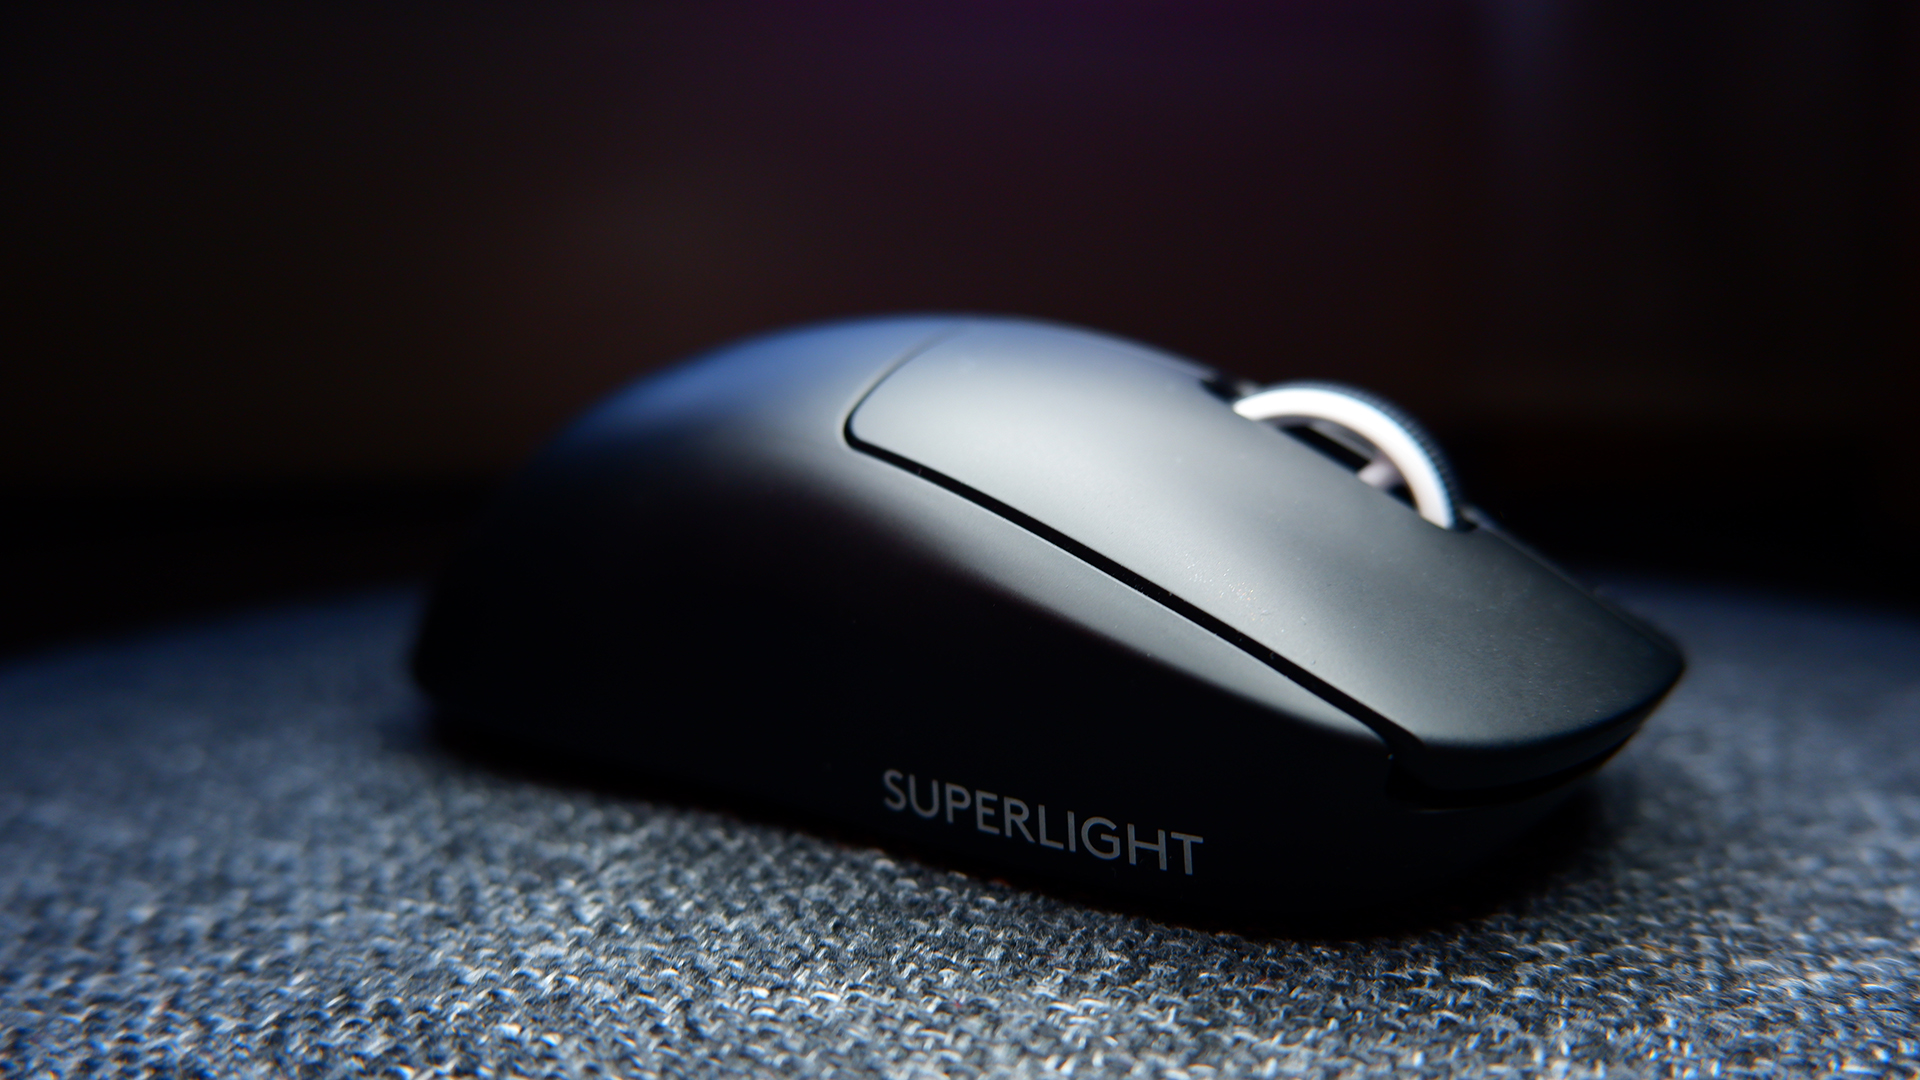 Carrot manual Conjugate Logitech G Pro X Superlight gaming mouse review | PC Gamer